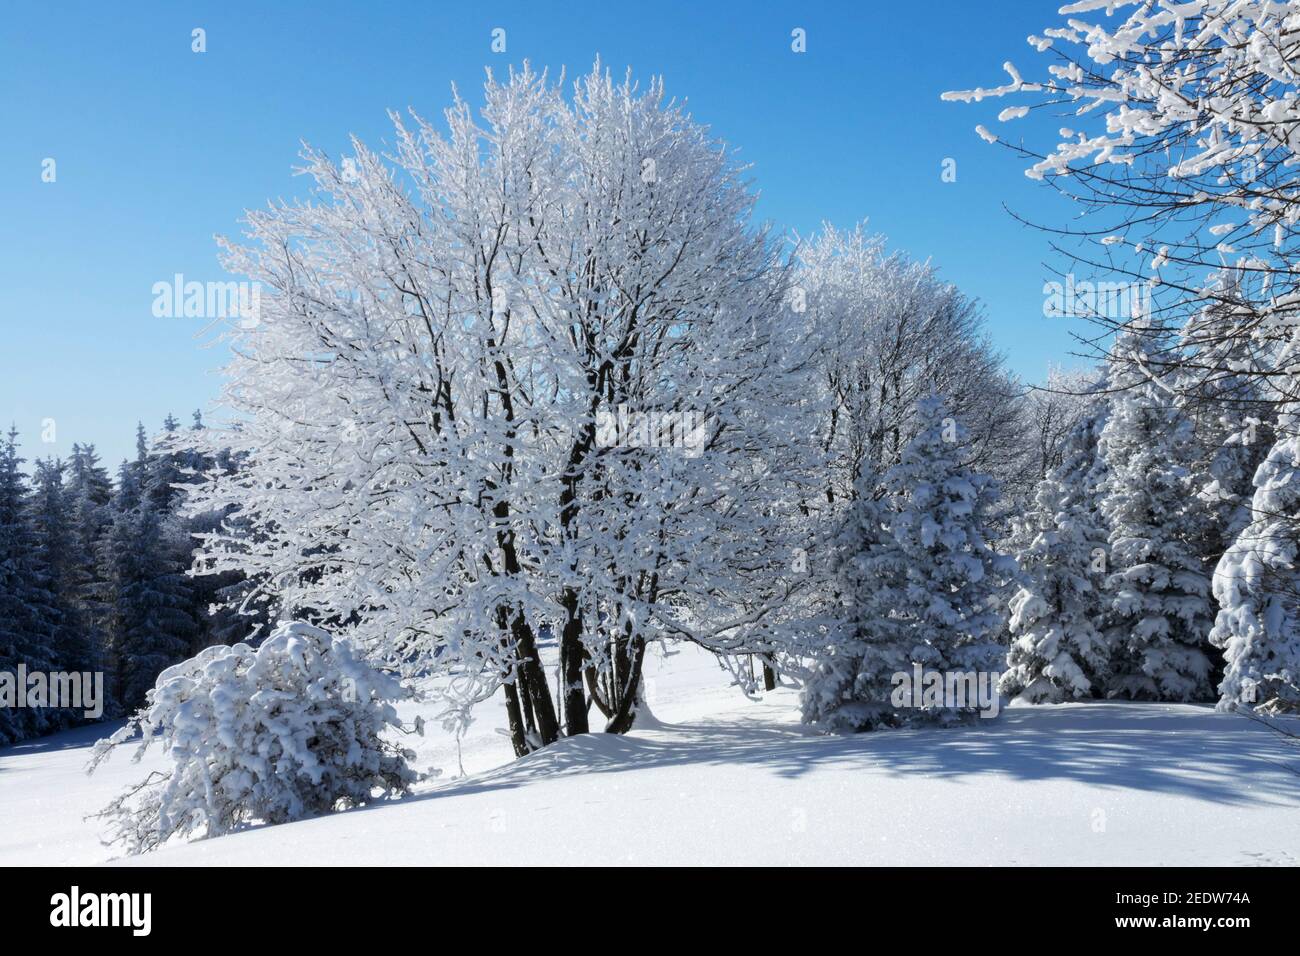 Erzgebirge winter scene hoar frosted trees in sunny day snow covered Stock Photo